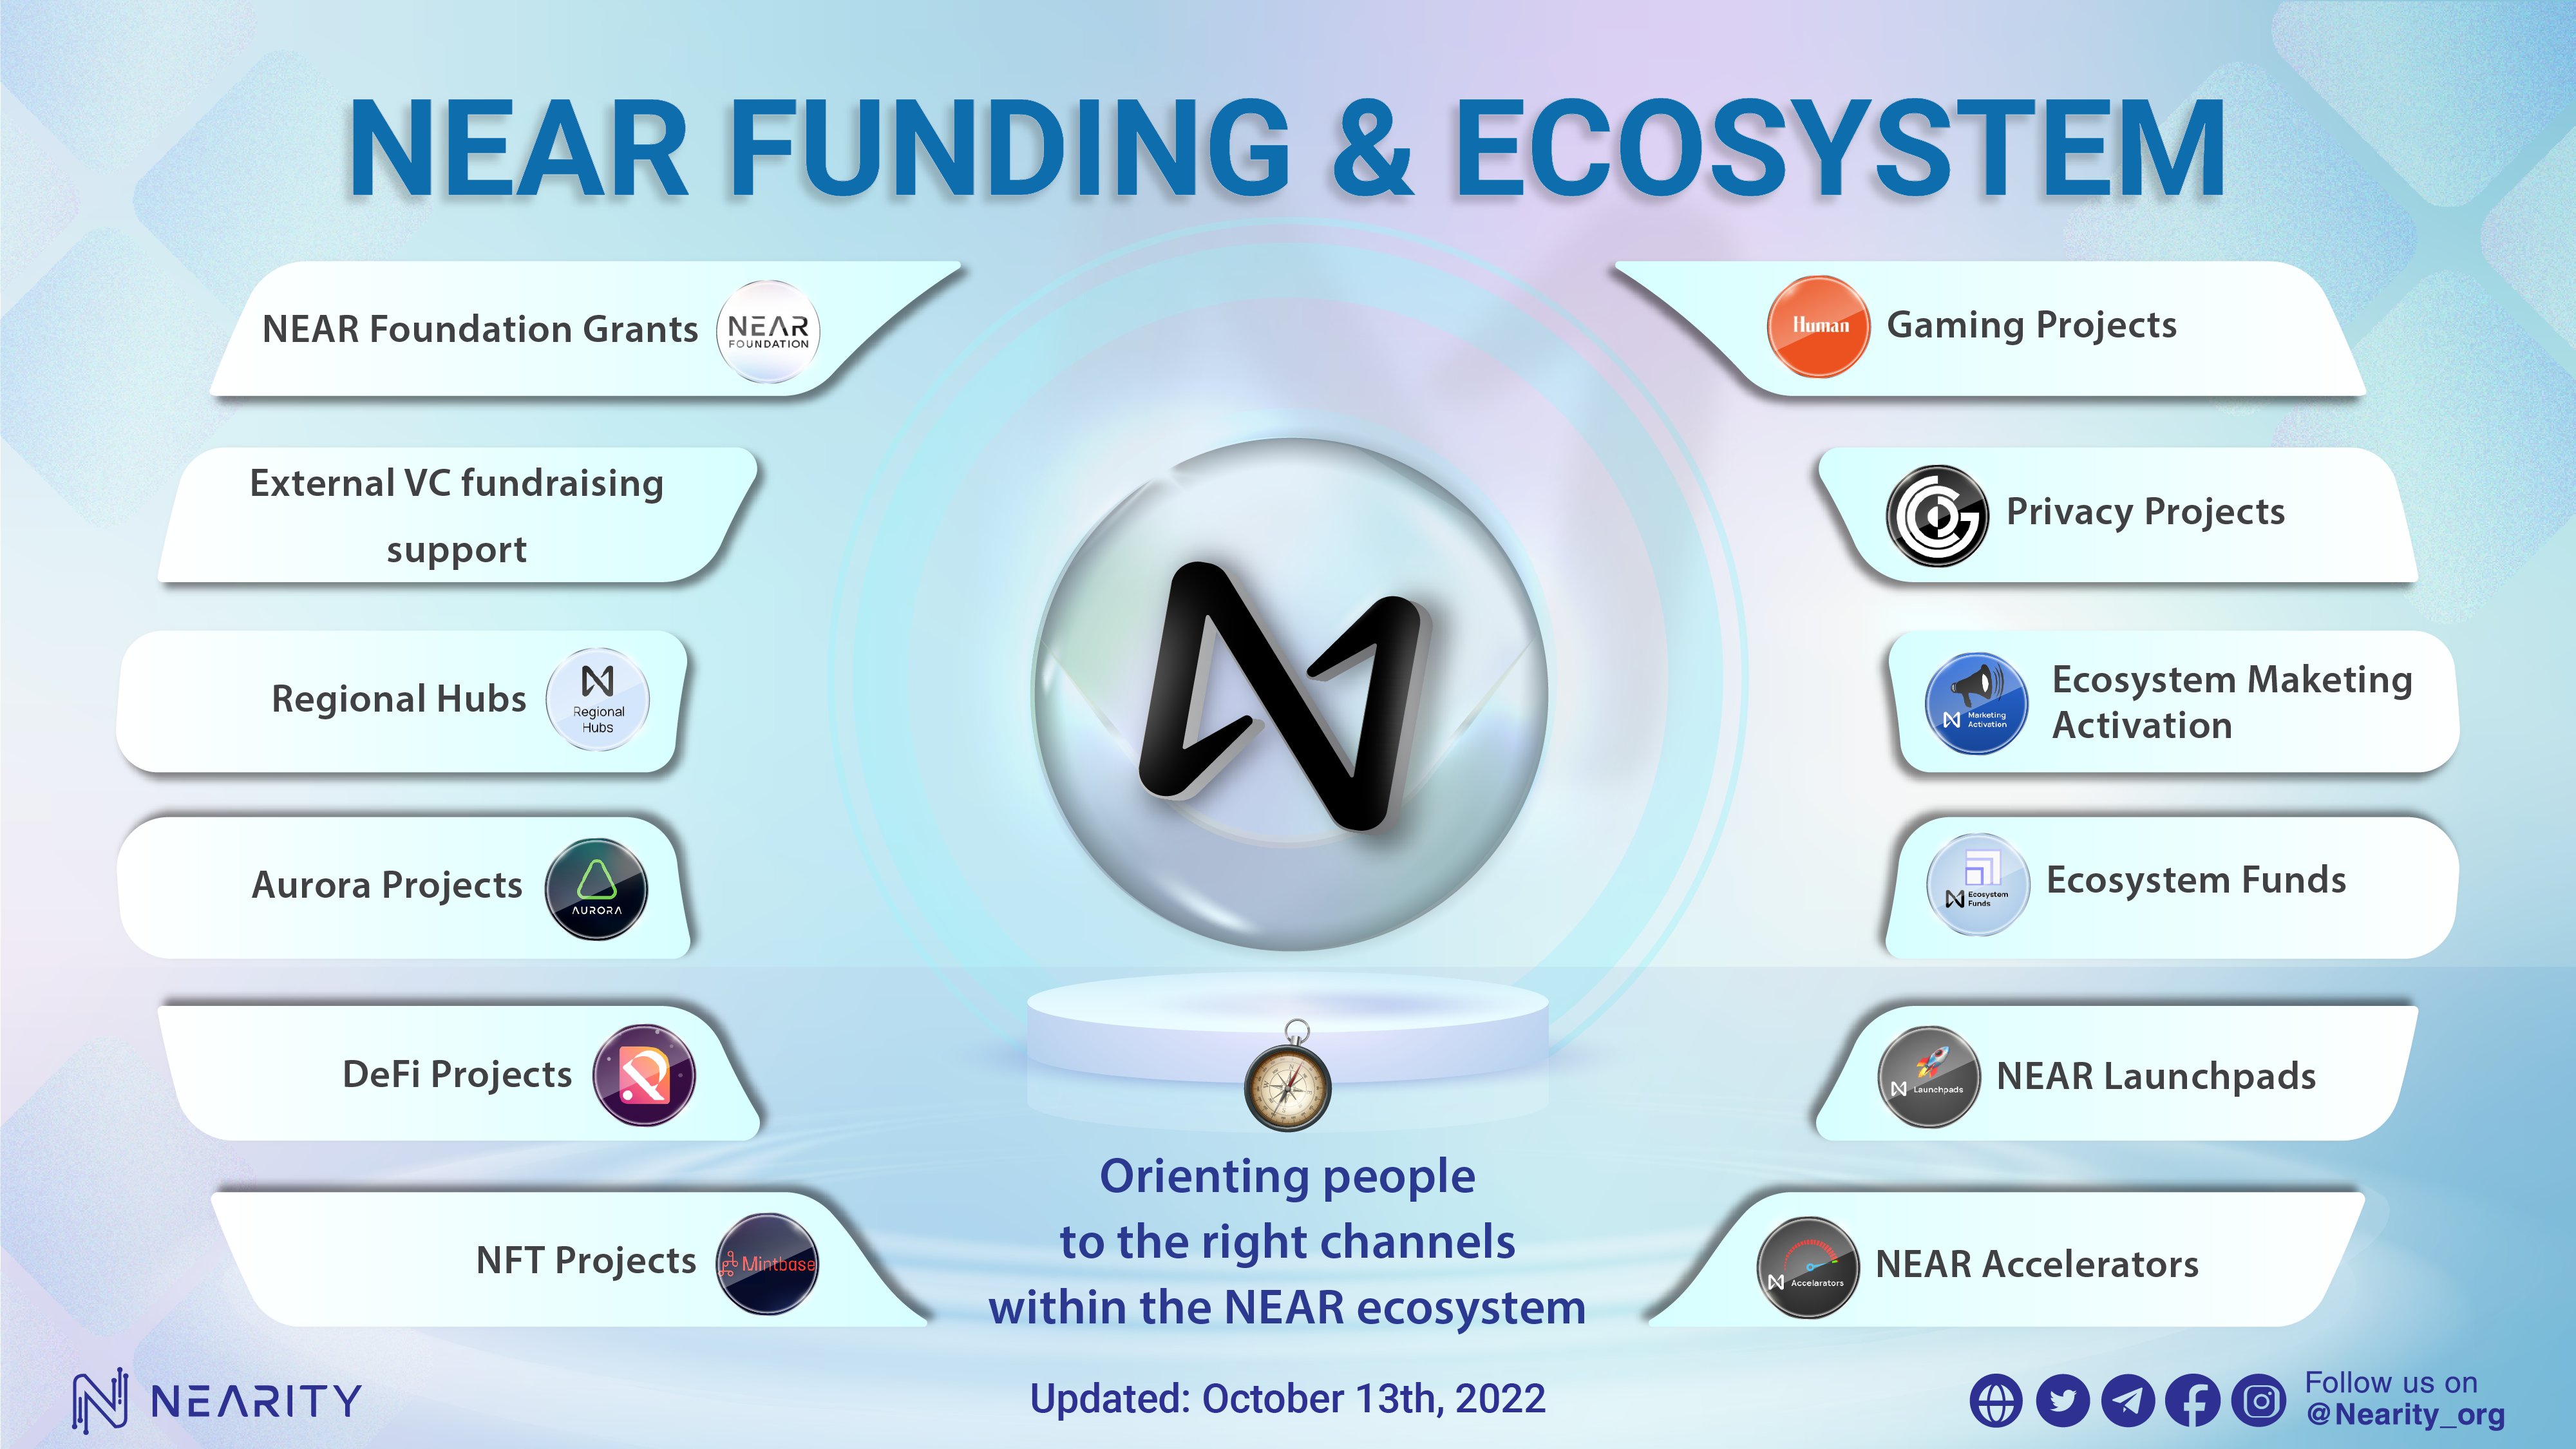 NEAR FUNDING & ECOSYSTEM These grant channels are to be used to expand and decentralize #NEAR ecosystem in a more efficient manner. More information is available at https://linktr.ee/nearfunding #Nearity #NEARProtocol #NEARisNOW #grant #DeFiProject #NFTs #GameFi #web3 #Aurora